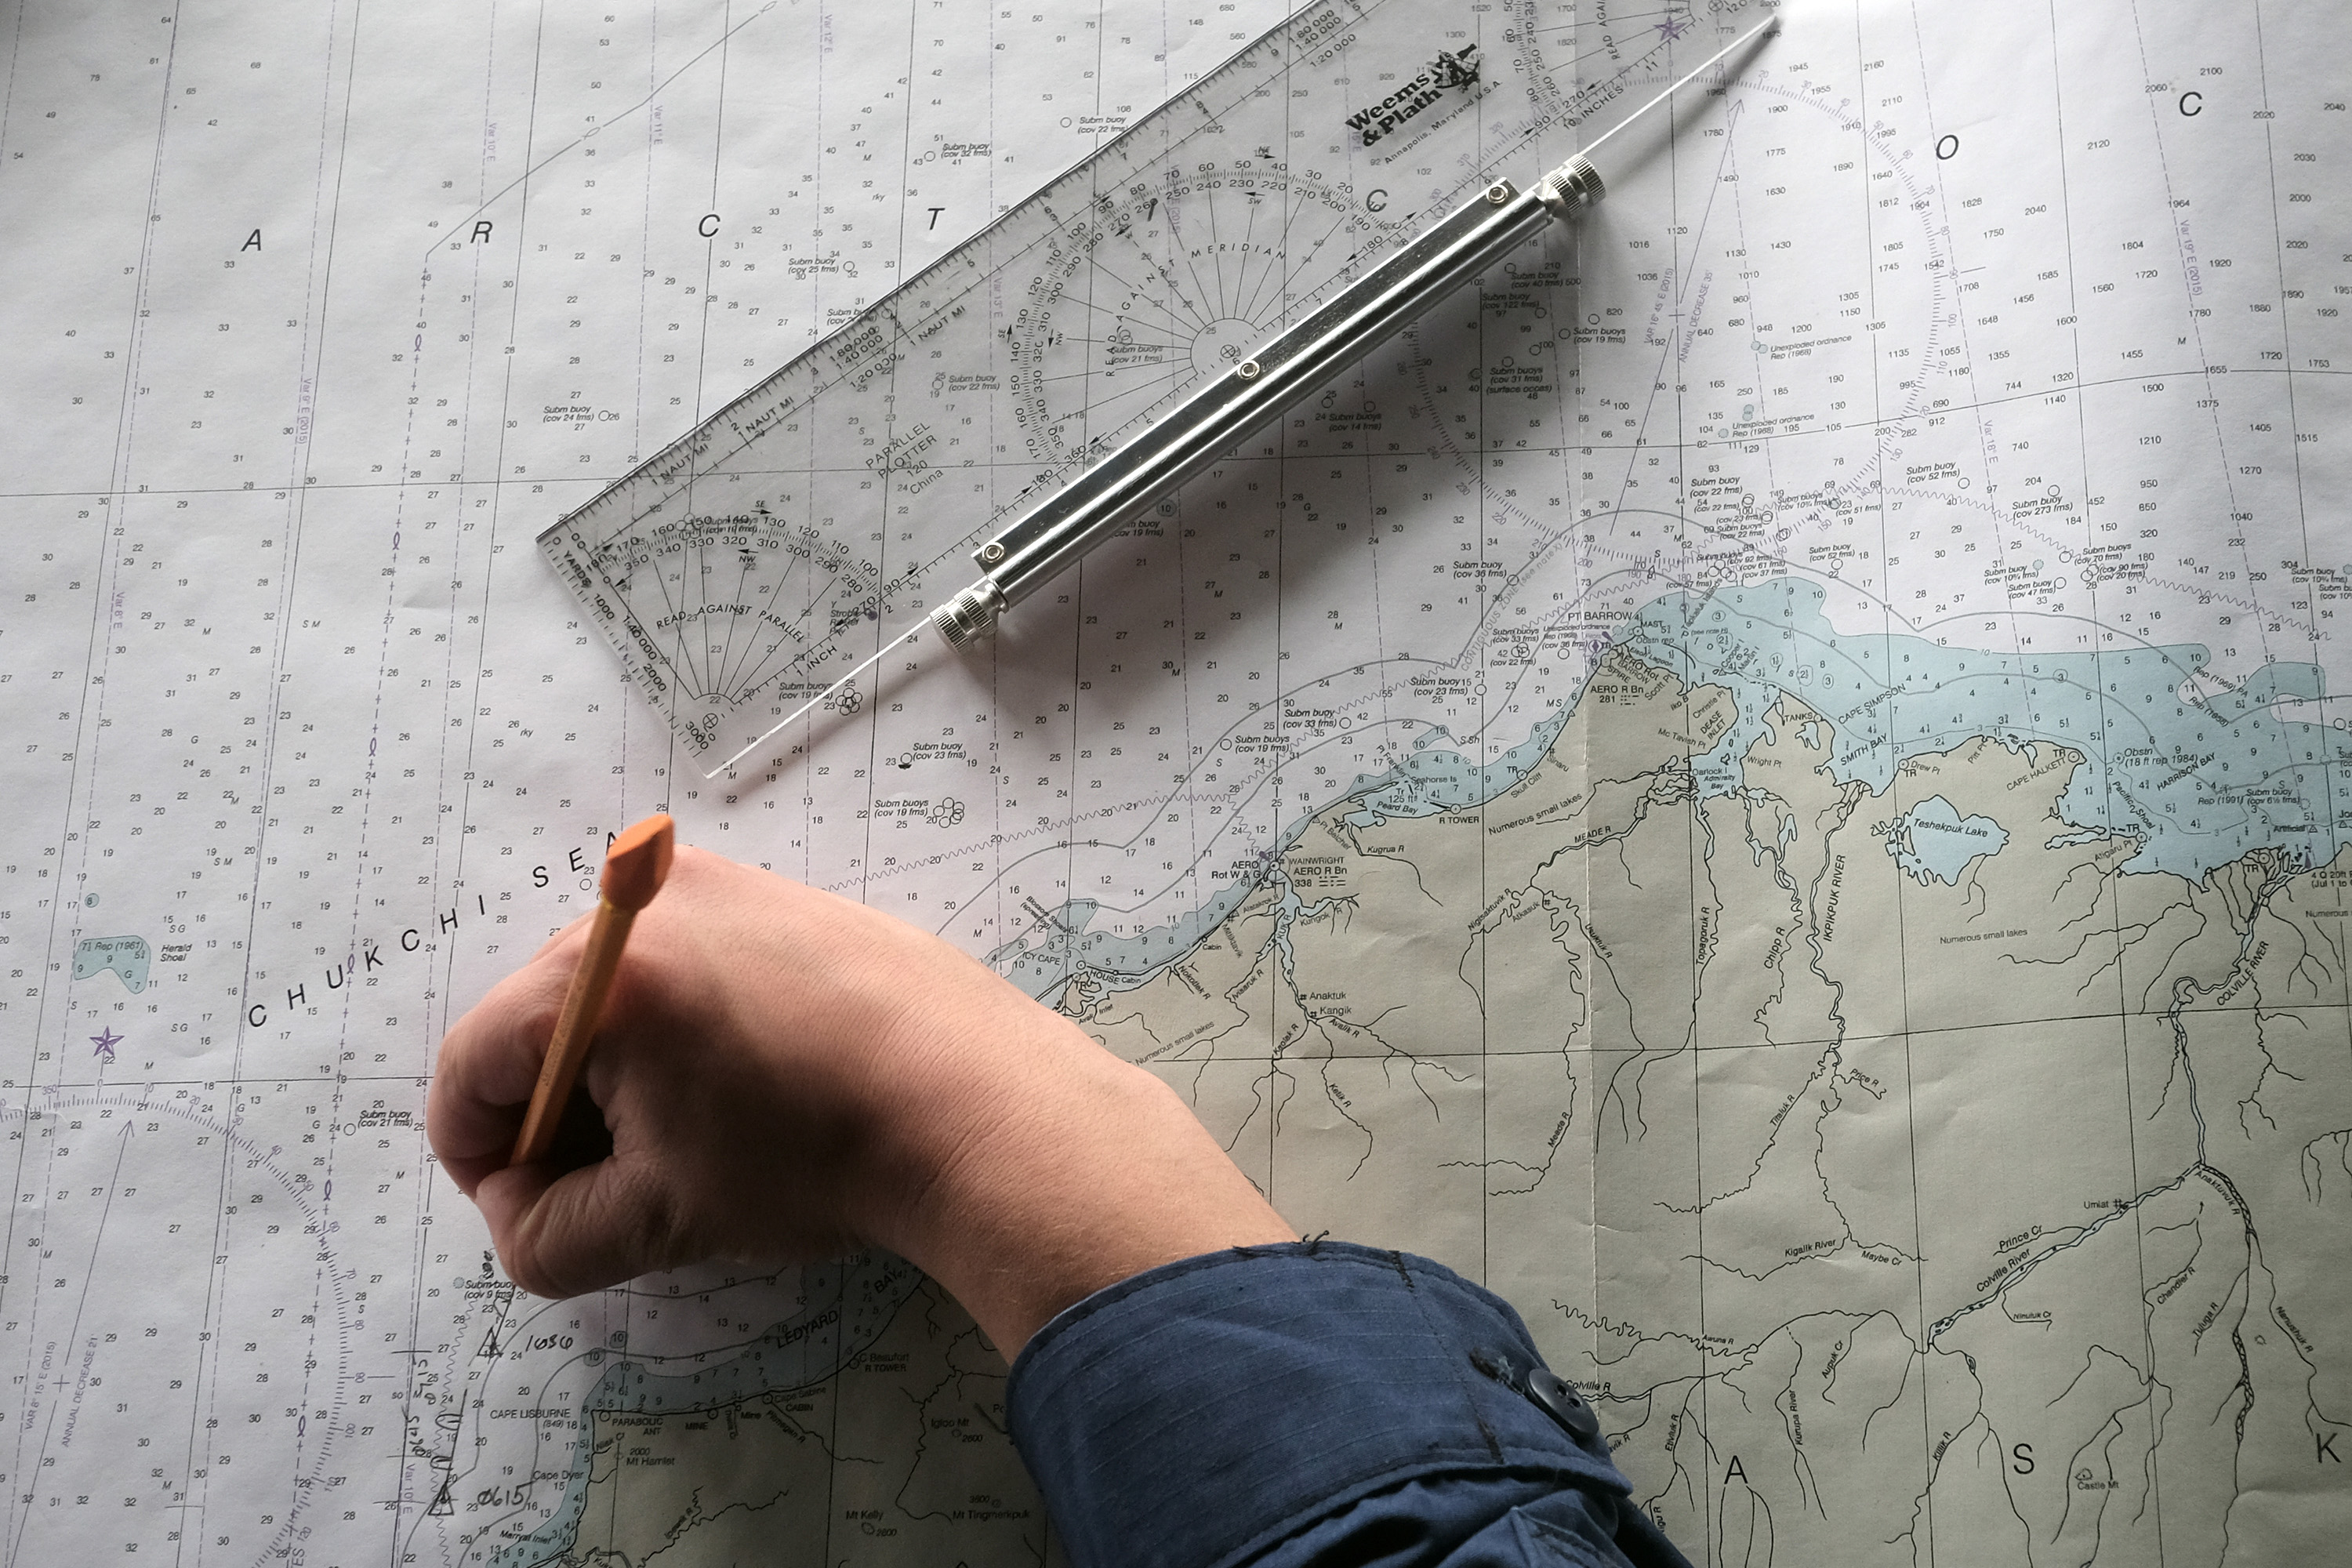 The route of the U.S. Coast Guard Cutter Healy is recorded on a nautical chart July 28 during a voyage to the Arctic Ocean. (Bonnie Jo Mount / The Washington Post)